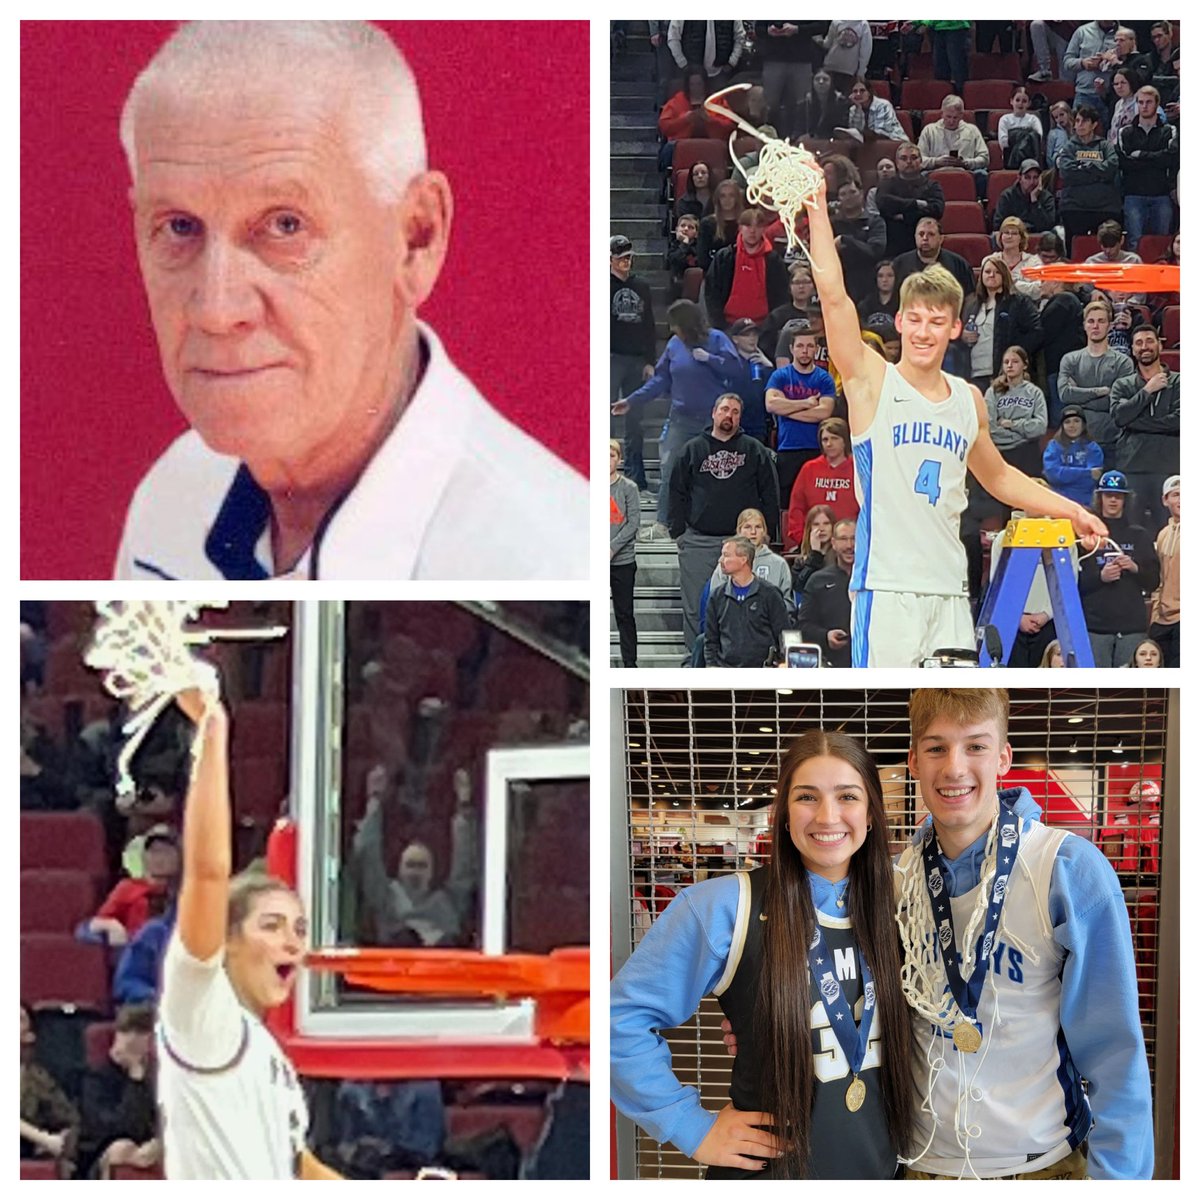 Grandpa Wes would be proud! Last Shepard grandkids @EvanShepard6 and @s_shepard32 are State Champs for @AGBluejayBB and @FHSTigerGBB He loved God, his Family and the great game of Basketball! #Legacy Great-Grandkids Up Next! @AGbroadcasting_ @MikeSautter_